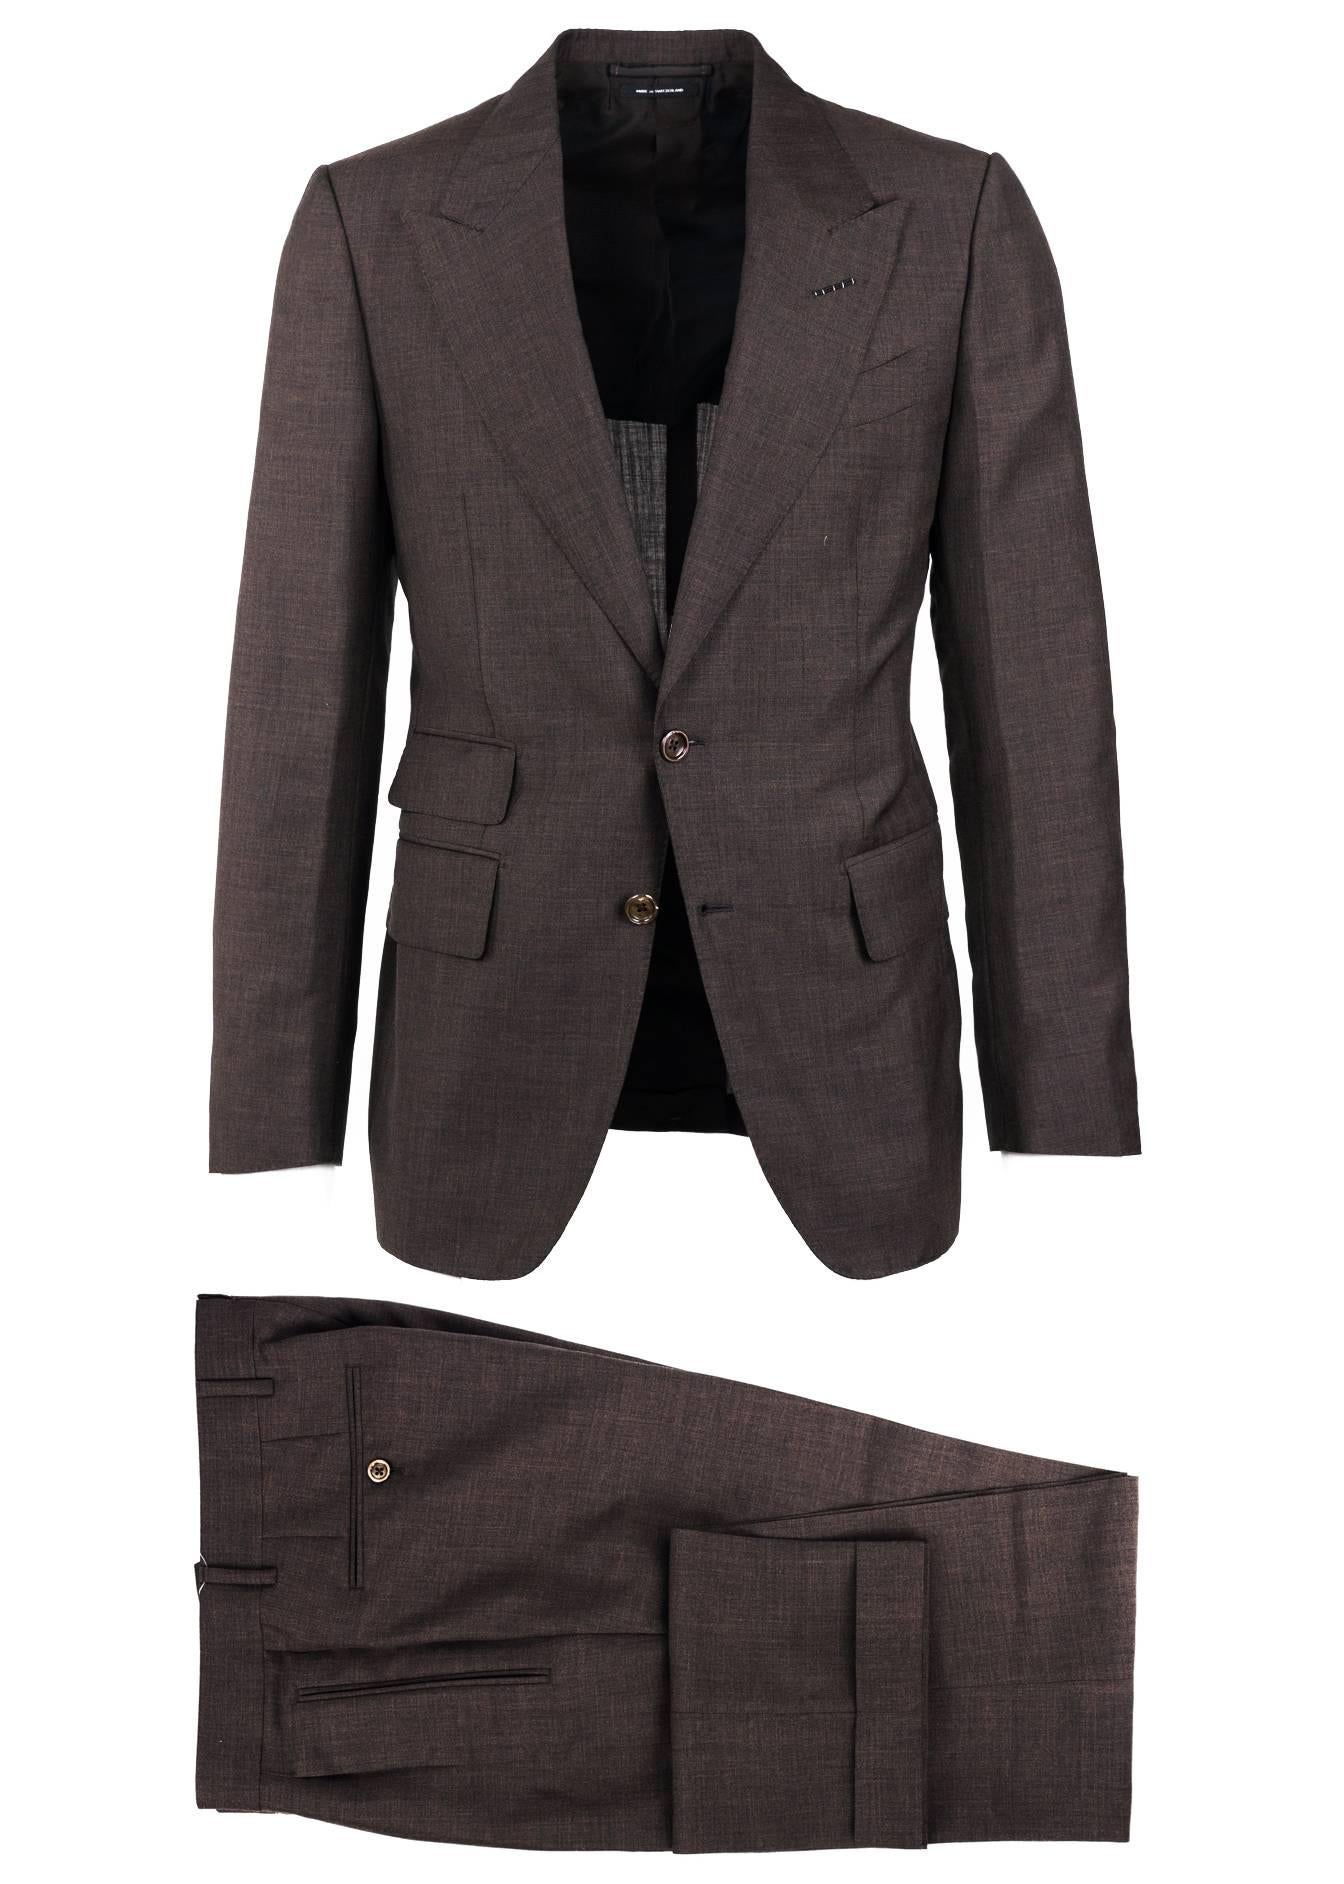 The signature Tom Ford Shelton suit updated in a wool blend textile with a brown undertone color. This constructed Shelton base jacket is finished with notch lapels and flap pockets in a two button silhouette. Dress the suit with a white or black